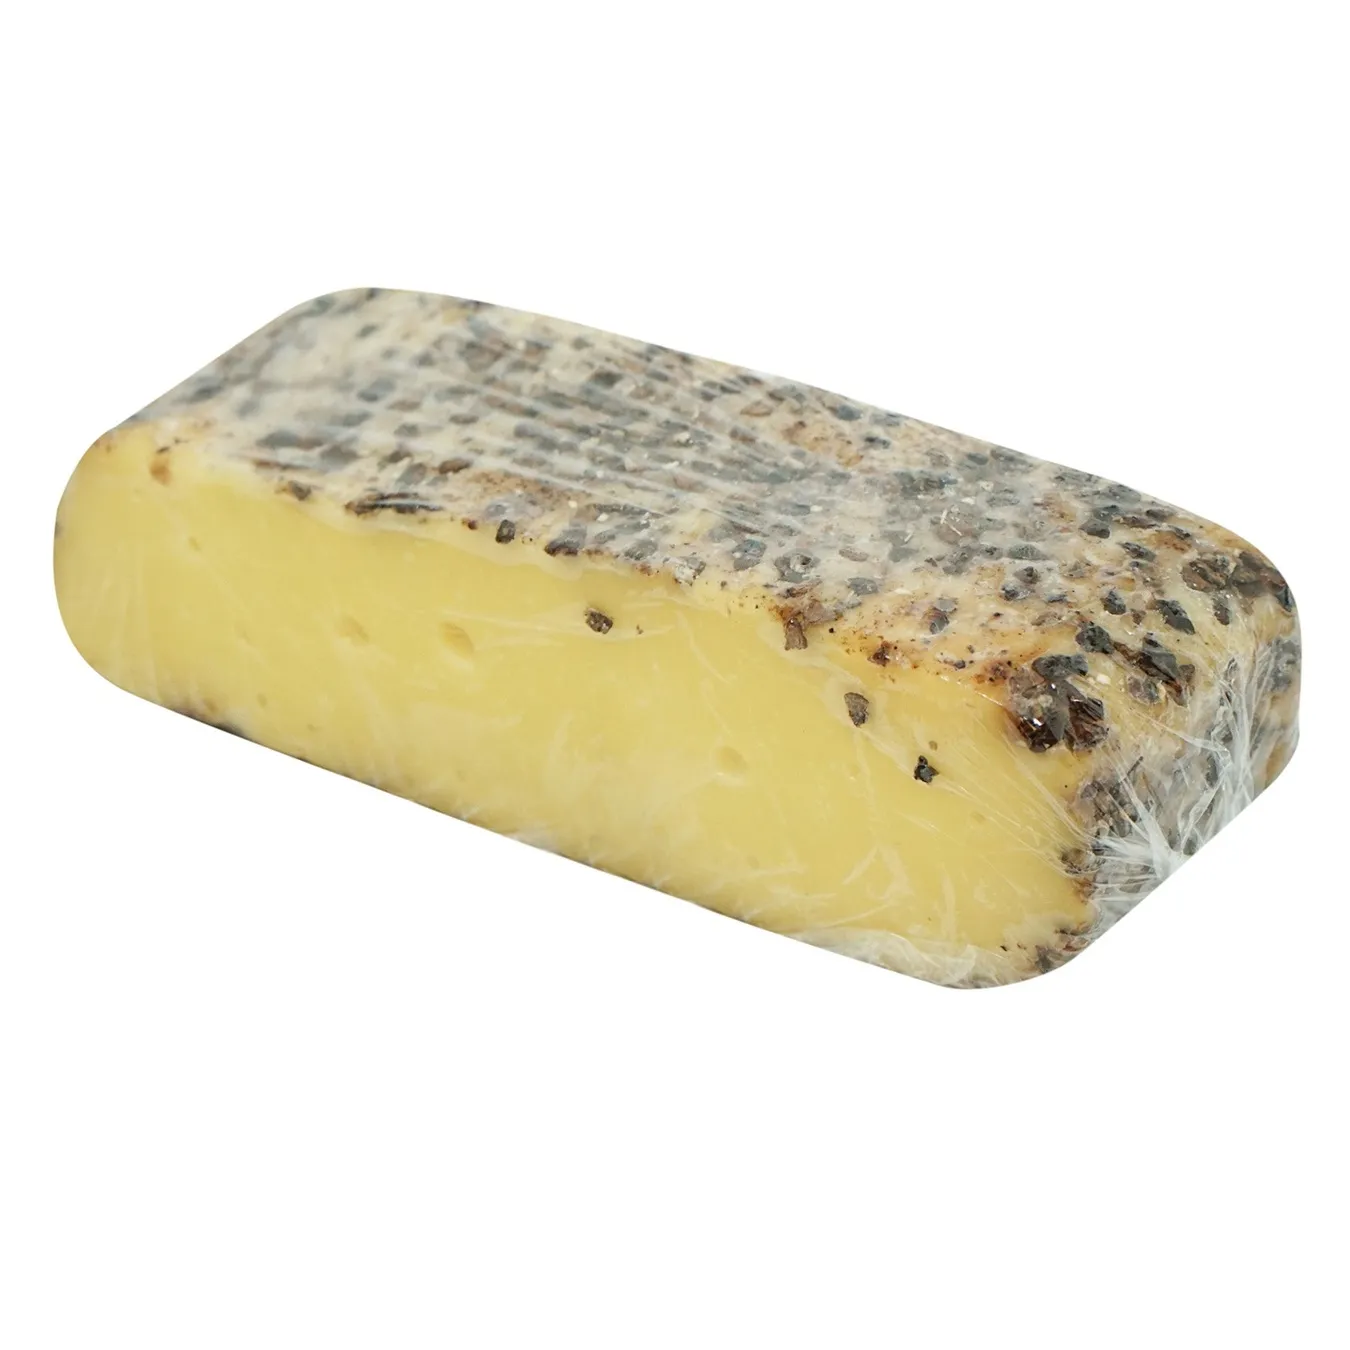 Vilvi smoked hunting cheese with black pepper 45% by weight